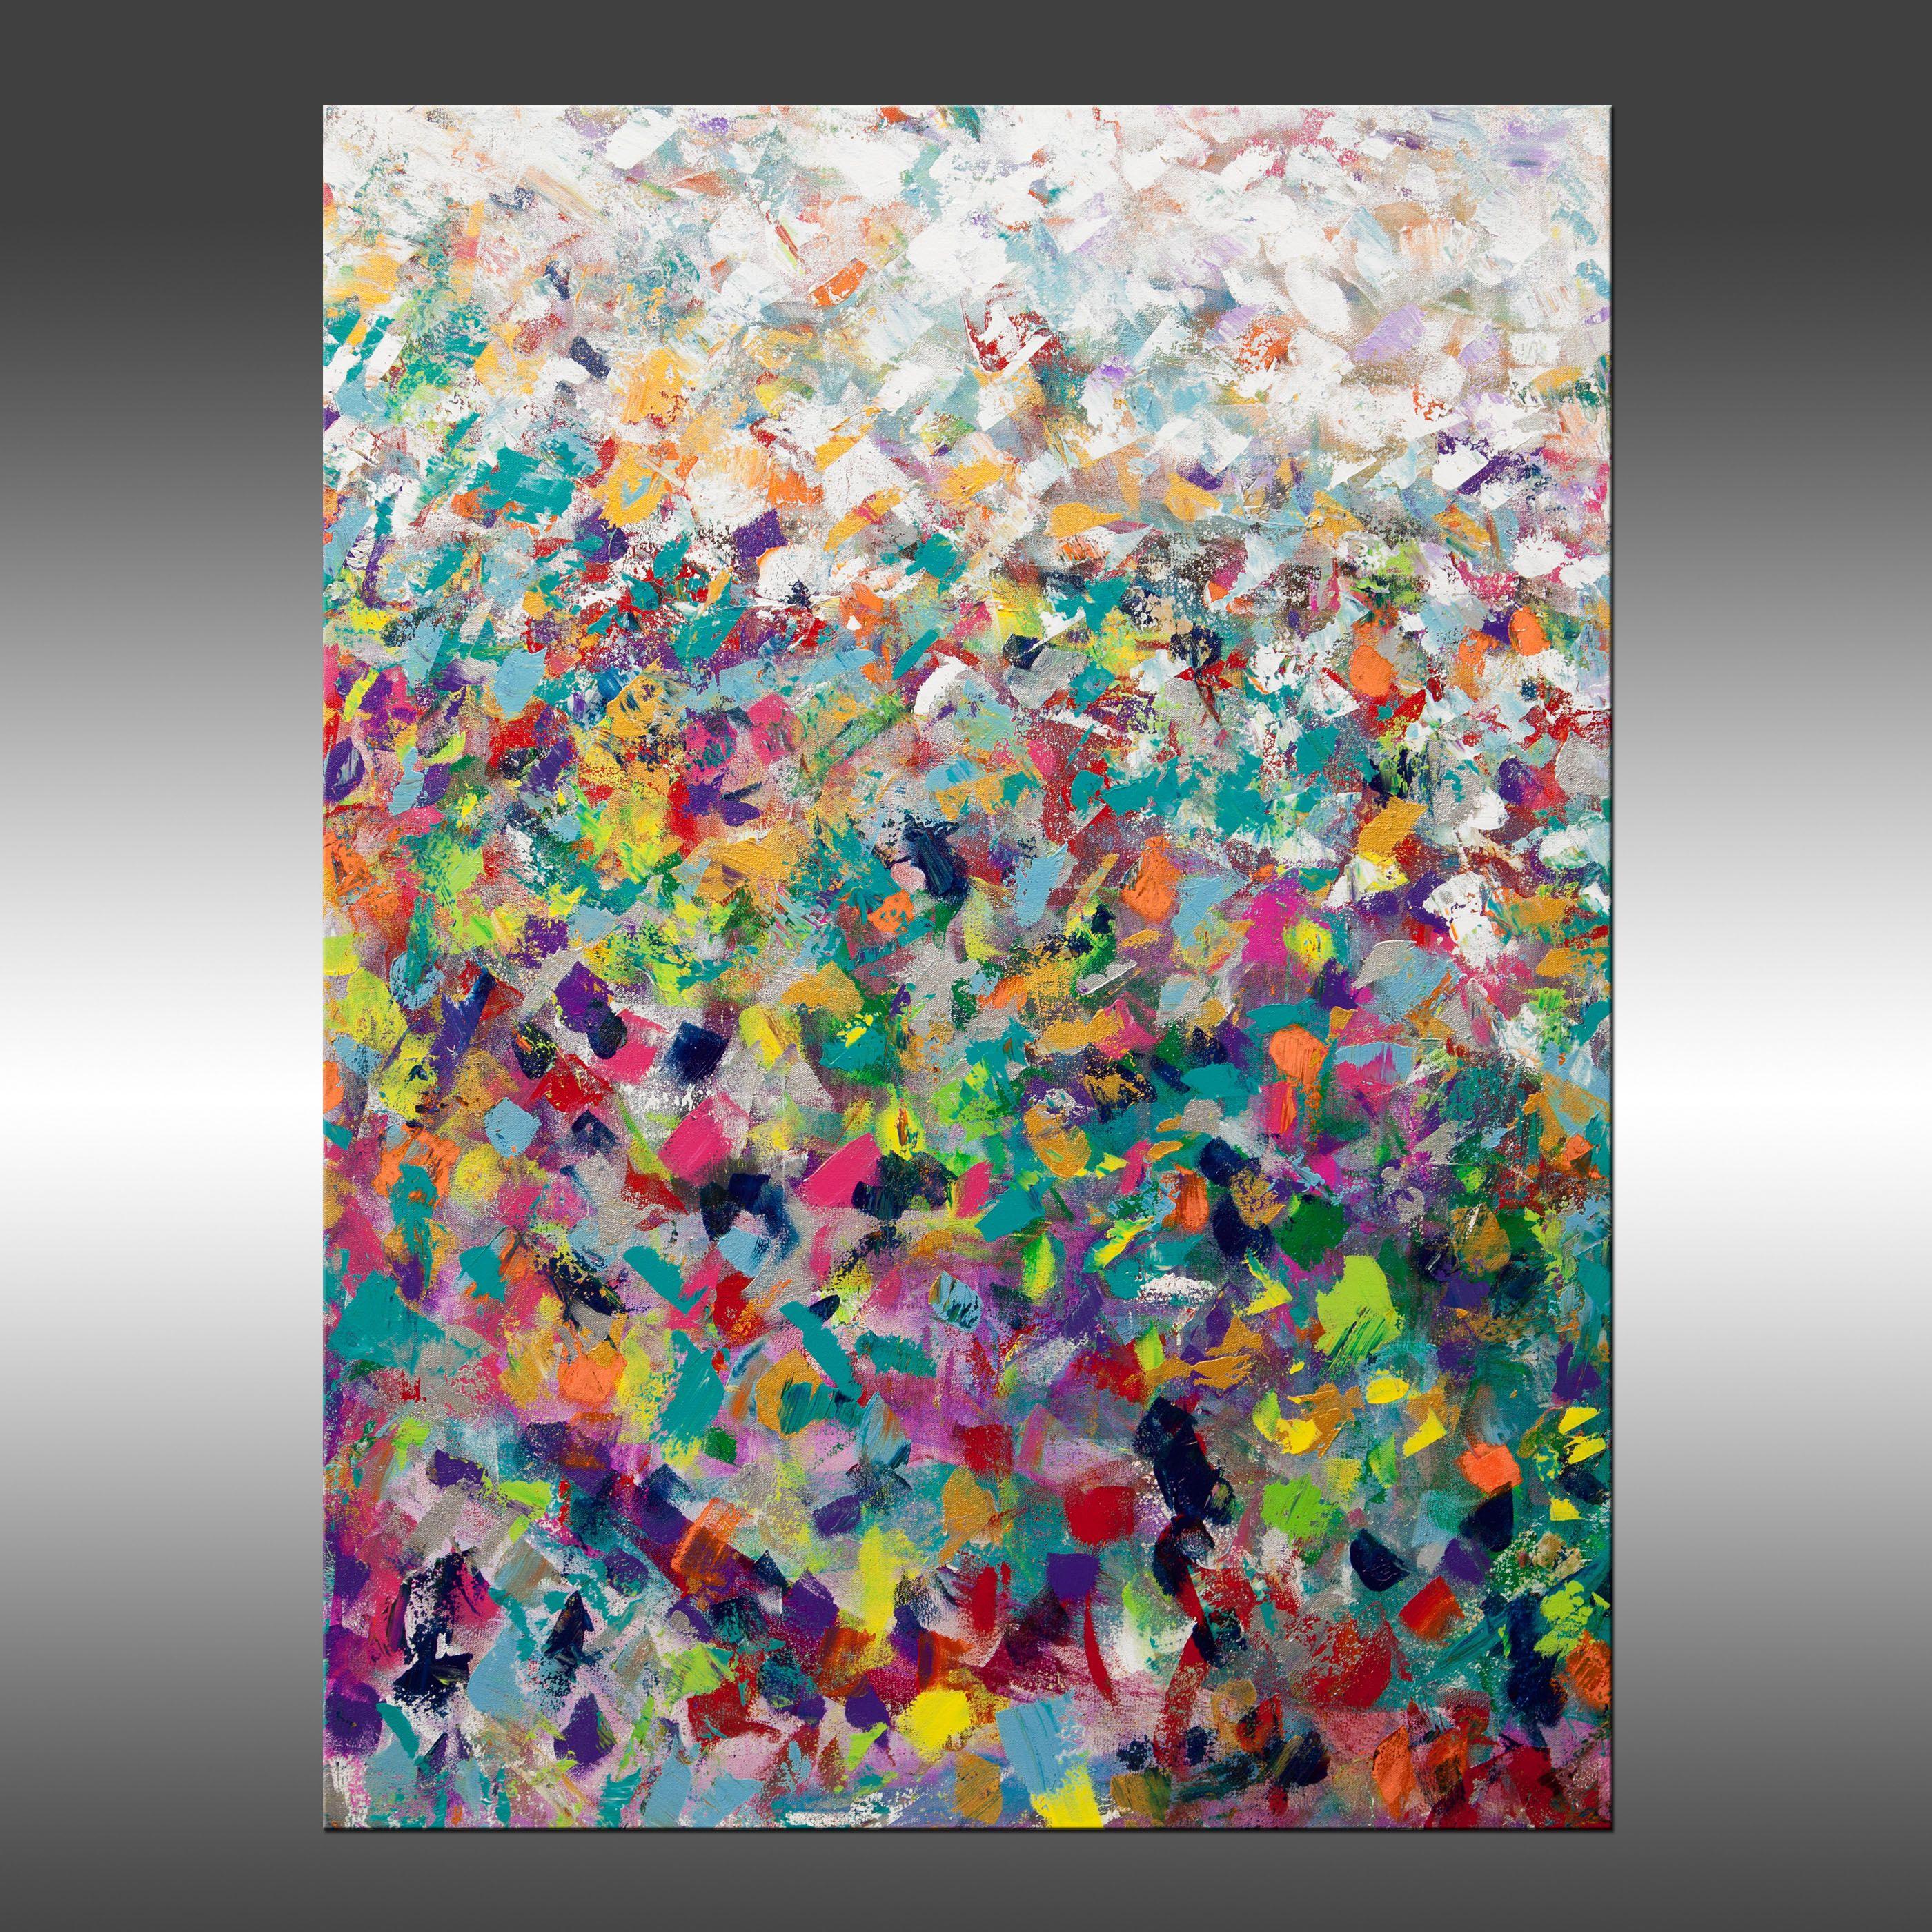 Magnetic 2 is an original painting, created with acrylic paint on gallery-wrapped canvas. It has a width of 30 inches and a height of 40 inches with a depth of 1.5 inches (30x40x1.5).     The colors used in the painting are white, teal, green, gold,